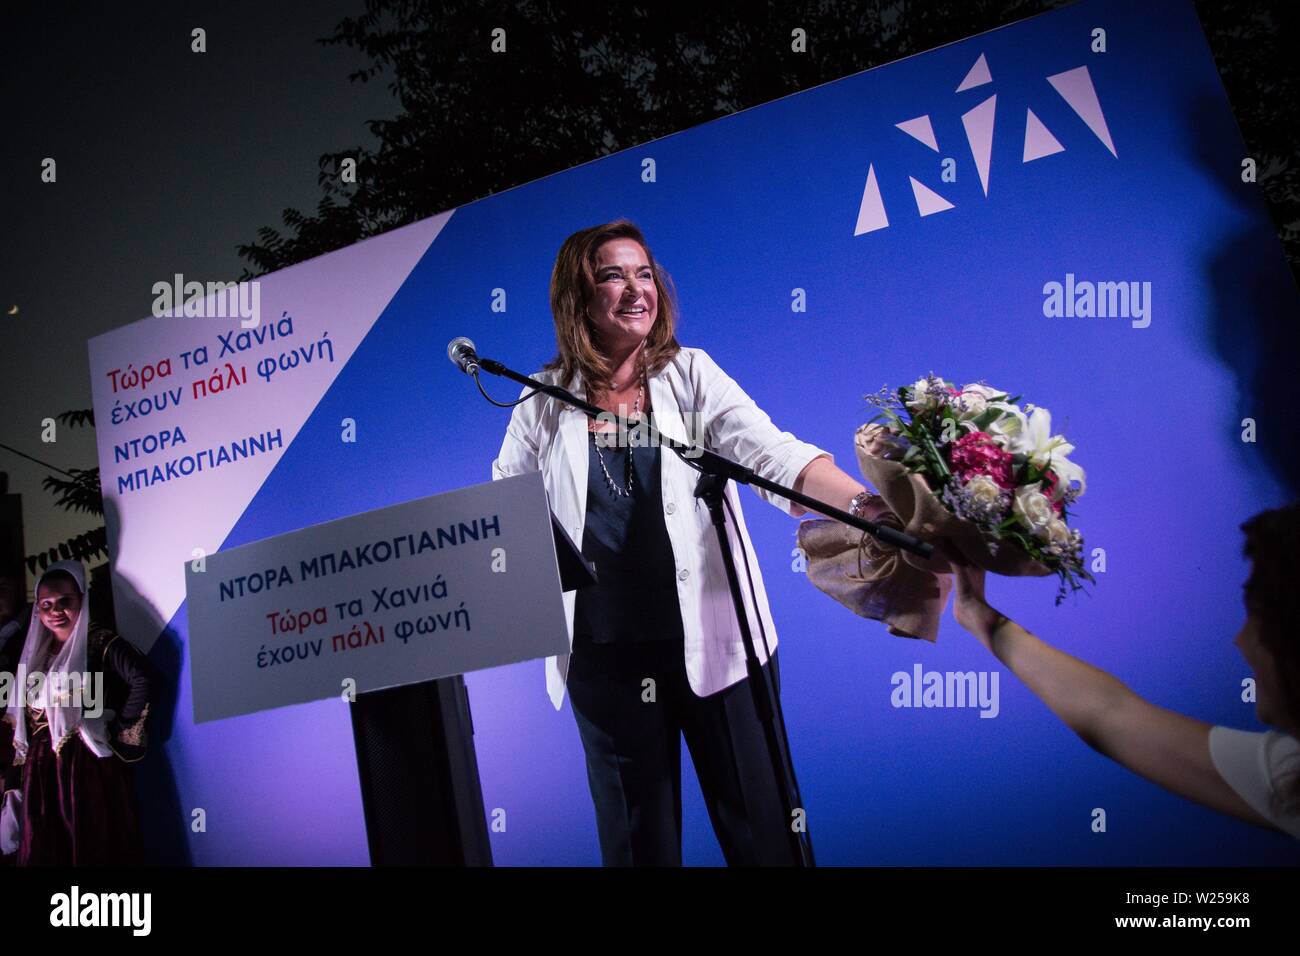 Chania, Greece. 05th July, 2019. A supporter gives flowers to Dora Bakoyannis after the event.Dora Bakoyannis, candidate MP for New Democracy in Chania and sister of Kyriakos Mitsotakis, leader of the New Democracy party, chairs a pre-election speech in Chania, Greece. New Democracy is SYRIZA's biggest competitor and possible new government in the Parliamentary elections. Credit: SOPA Images Limited/Alamy Live News Stock Photo